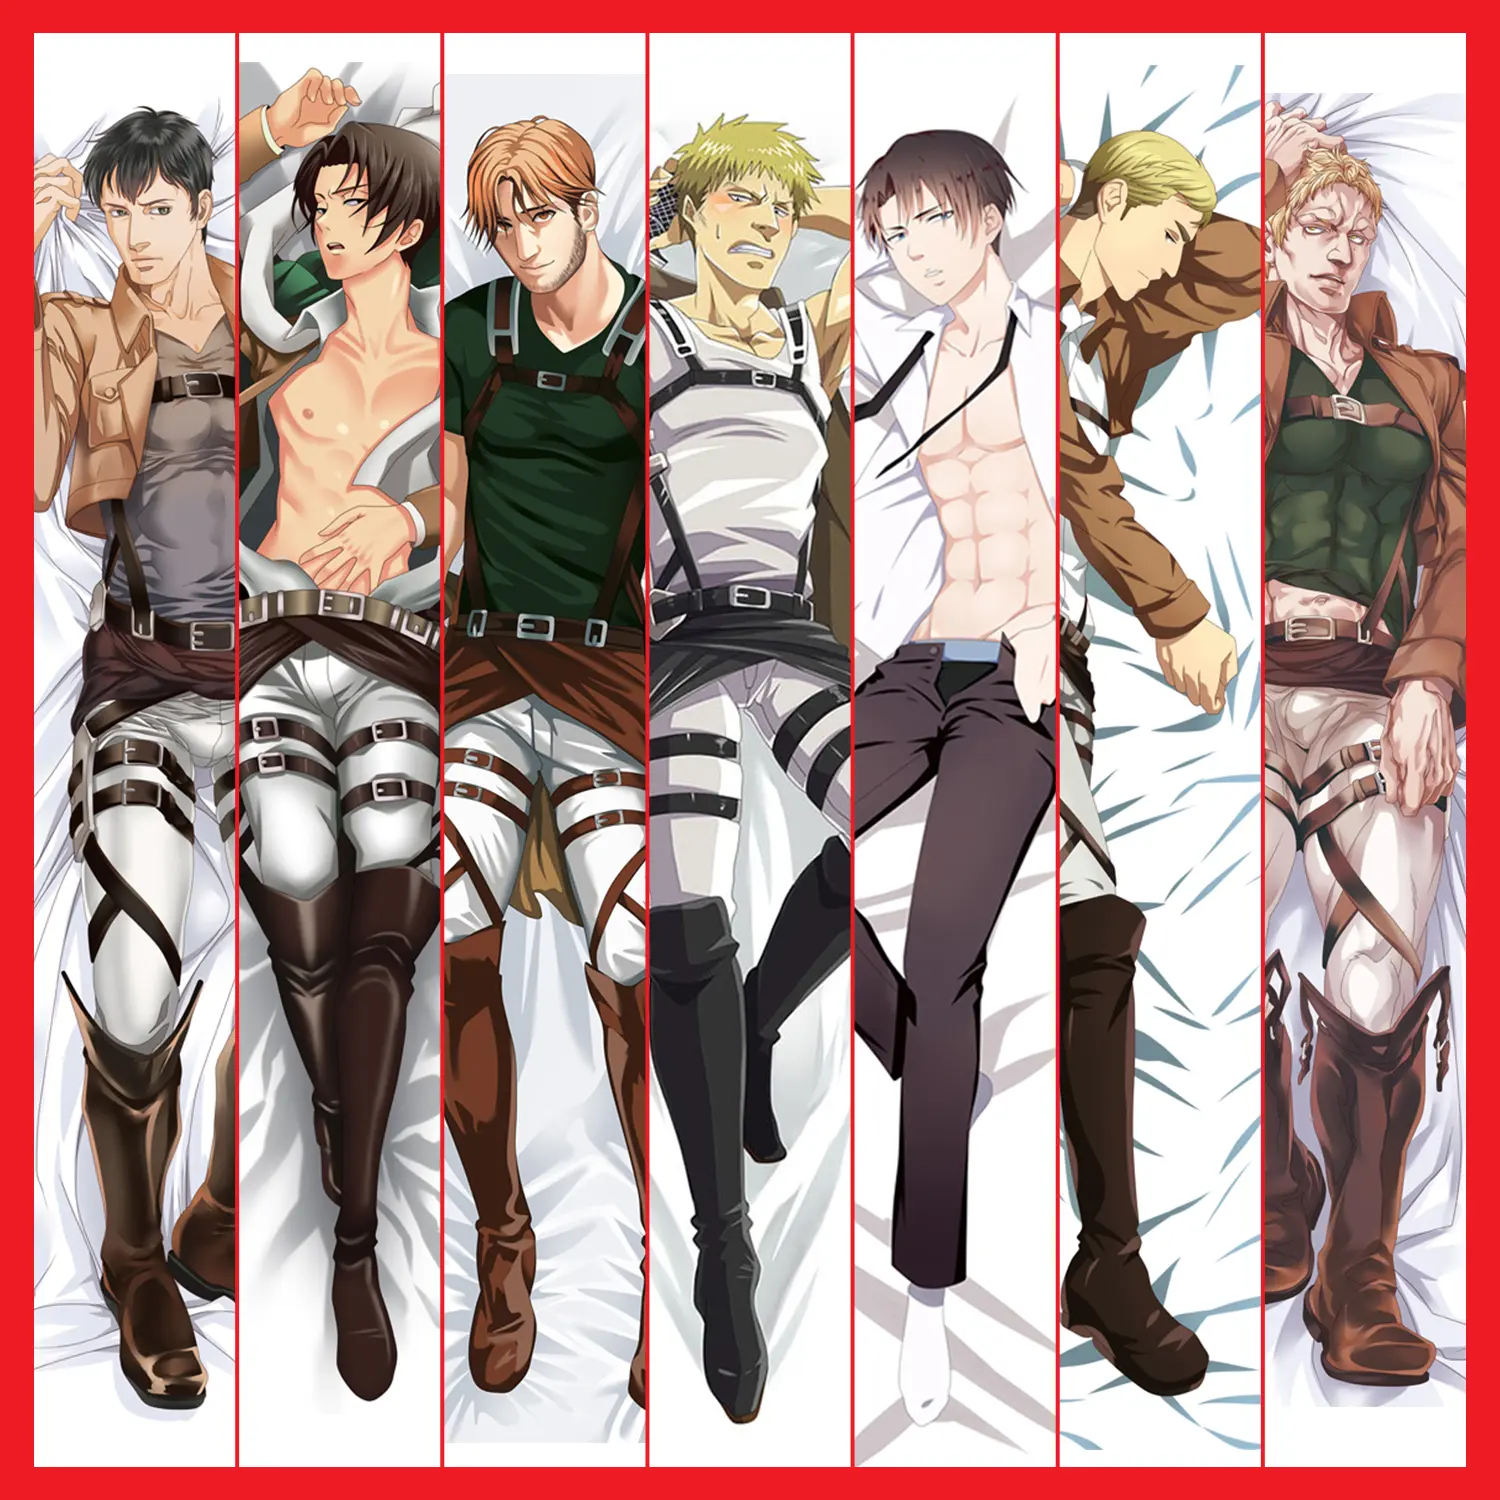 Attack on Titan – Different Hot Male Characters Themed Dakimakura Hugging Body Pillow Covers (8 Designs) Bed & Pillow Covers